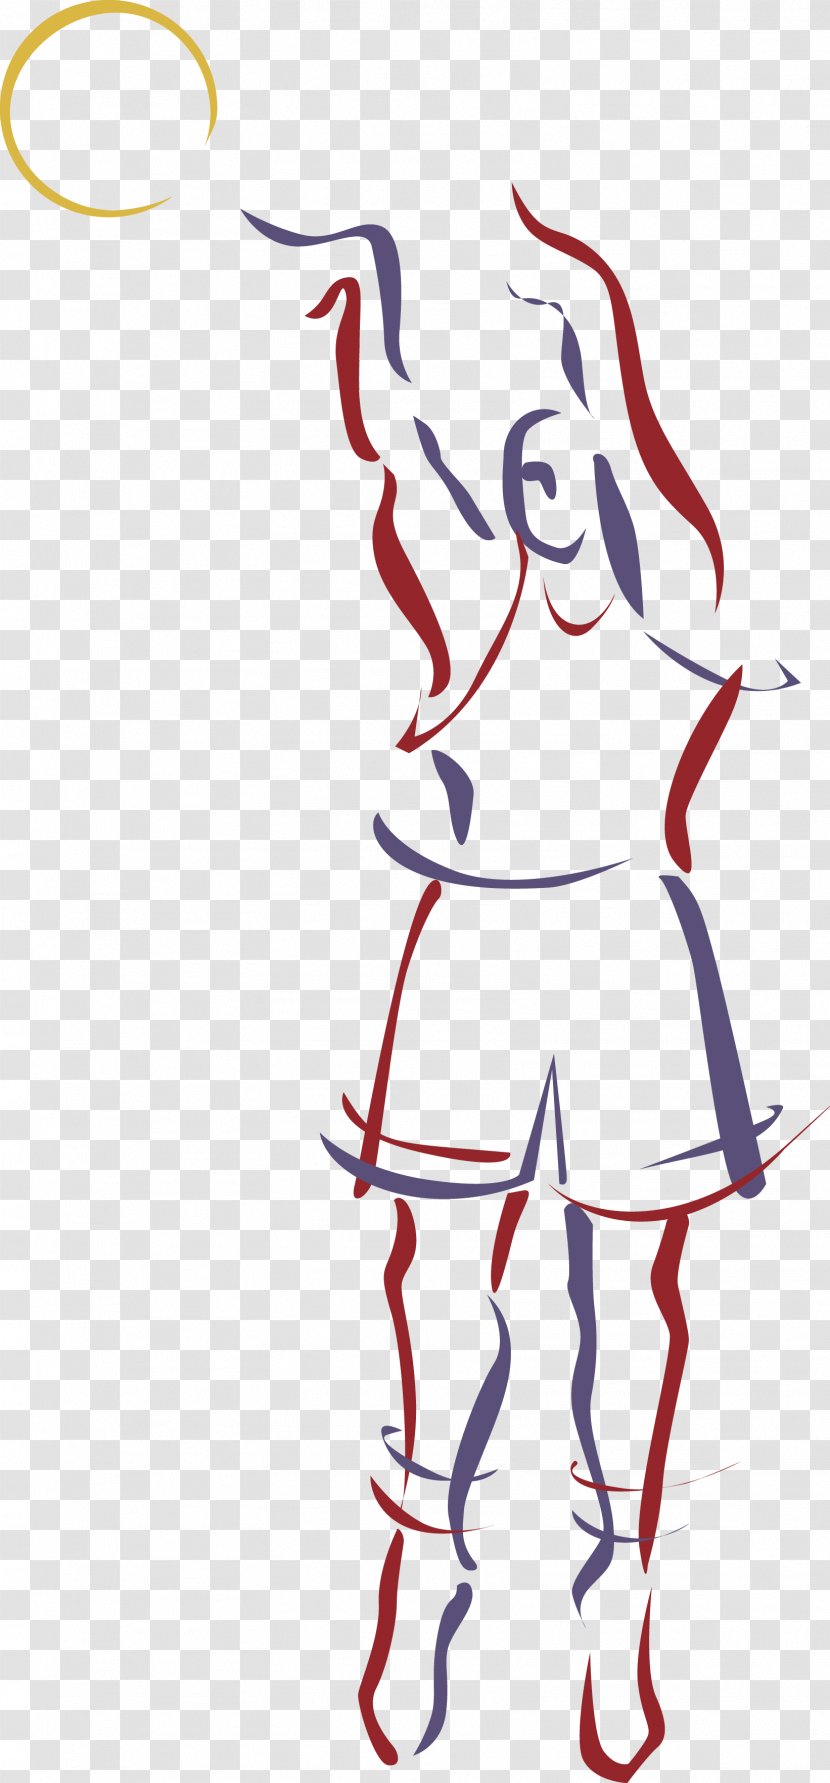 Illustration - Heart - Boy With Hand Drawn Shot Transparent PNG